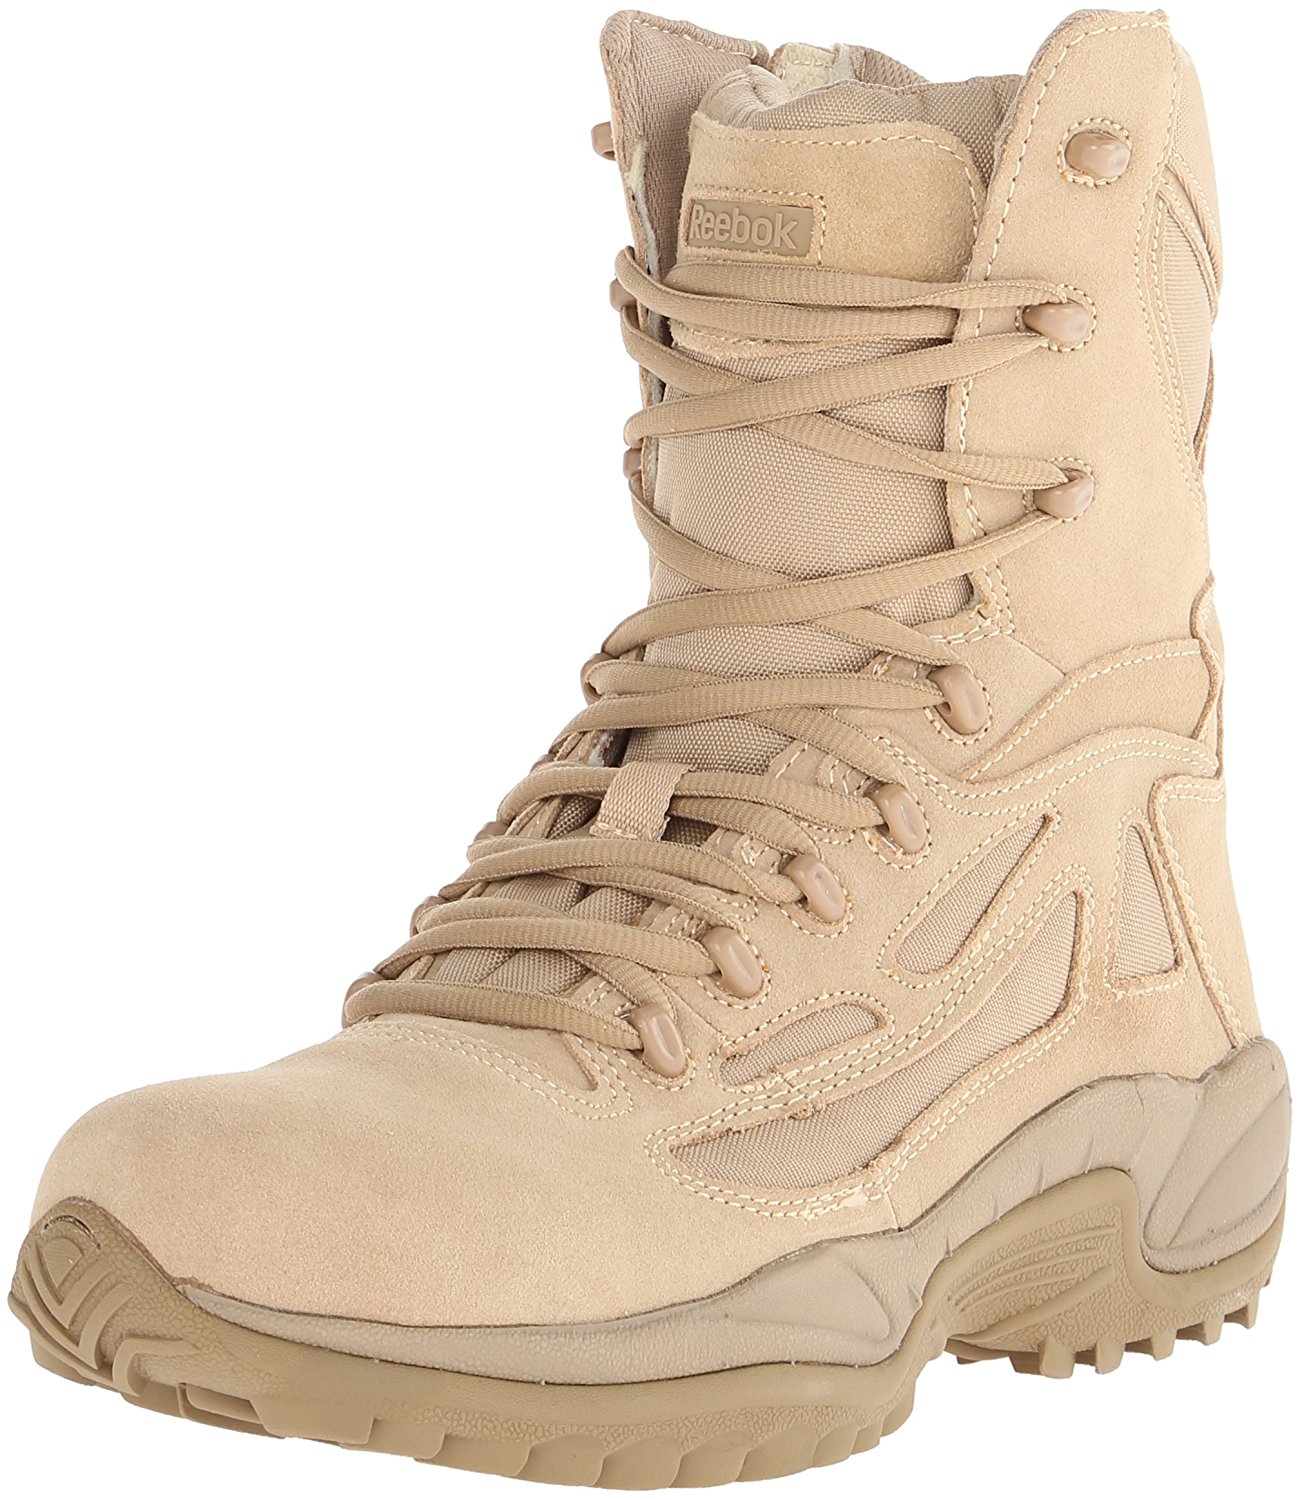 reebok rapid response boots review